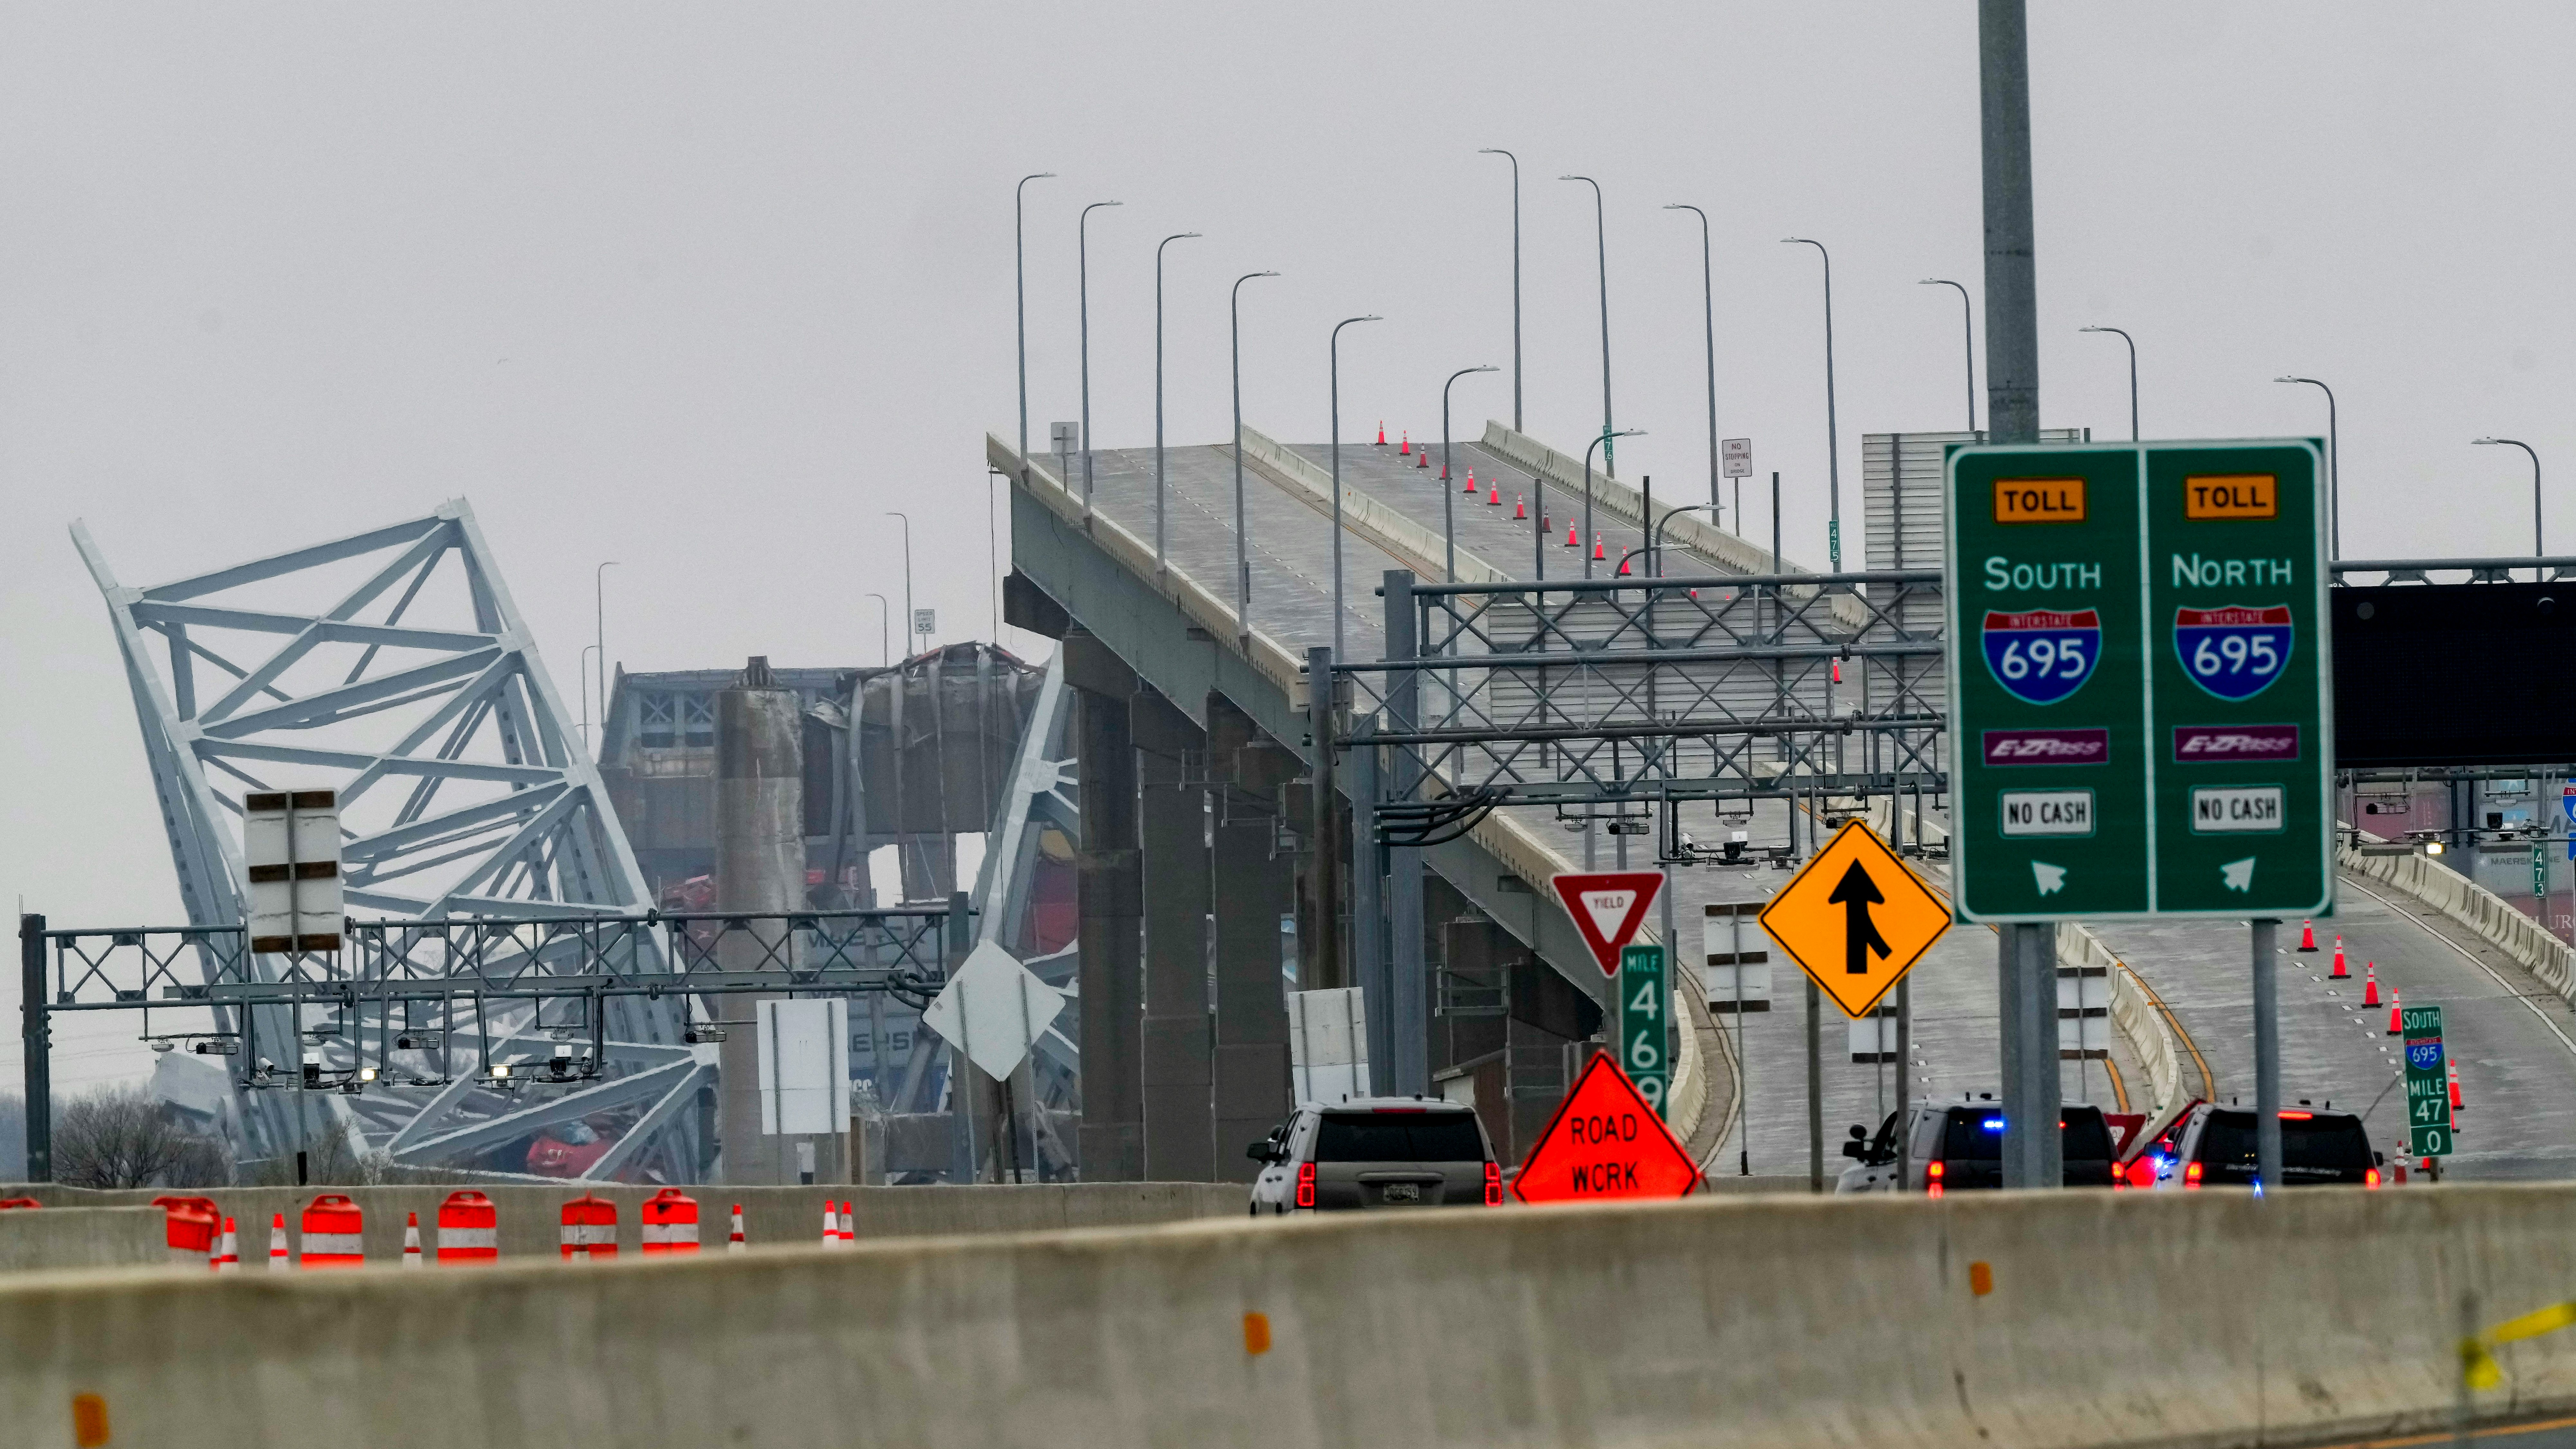 After Bridge Collapse, Ships Carrying Cars, Heavy Equipment Need to Find New Harbor